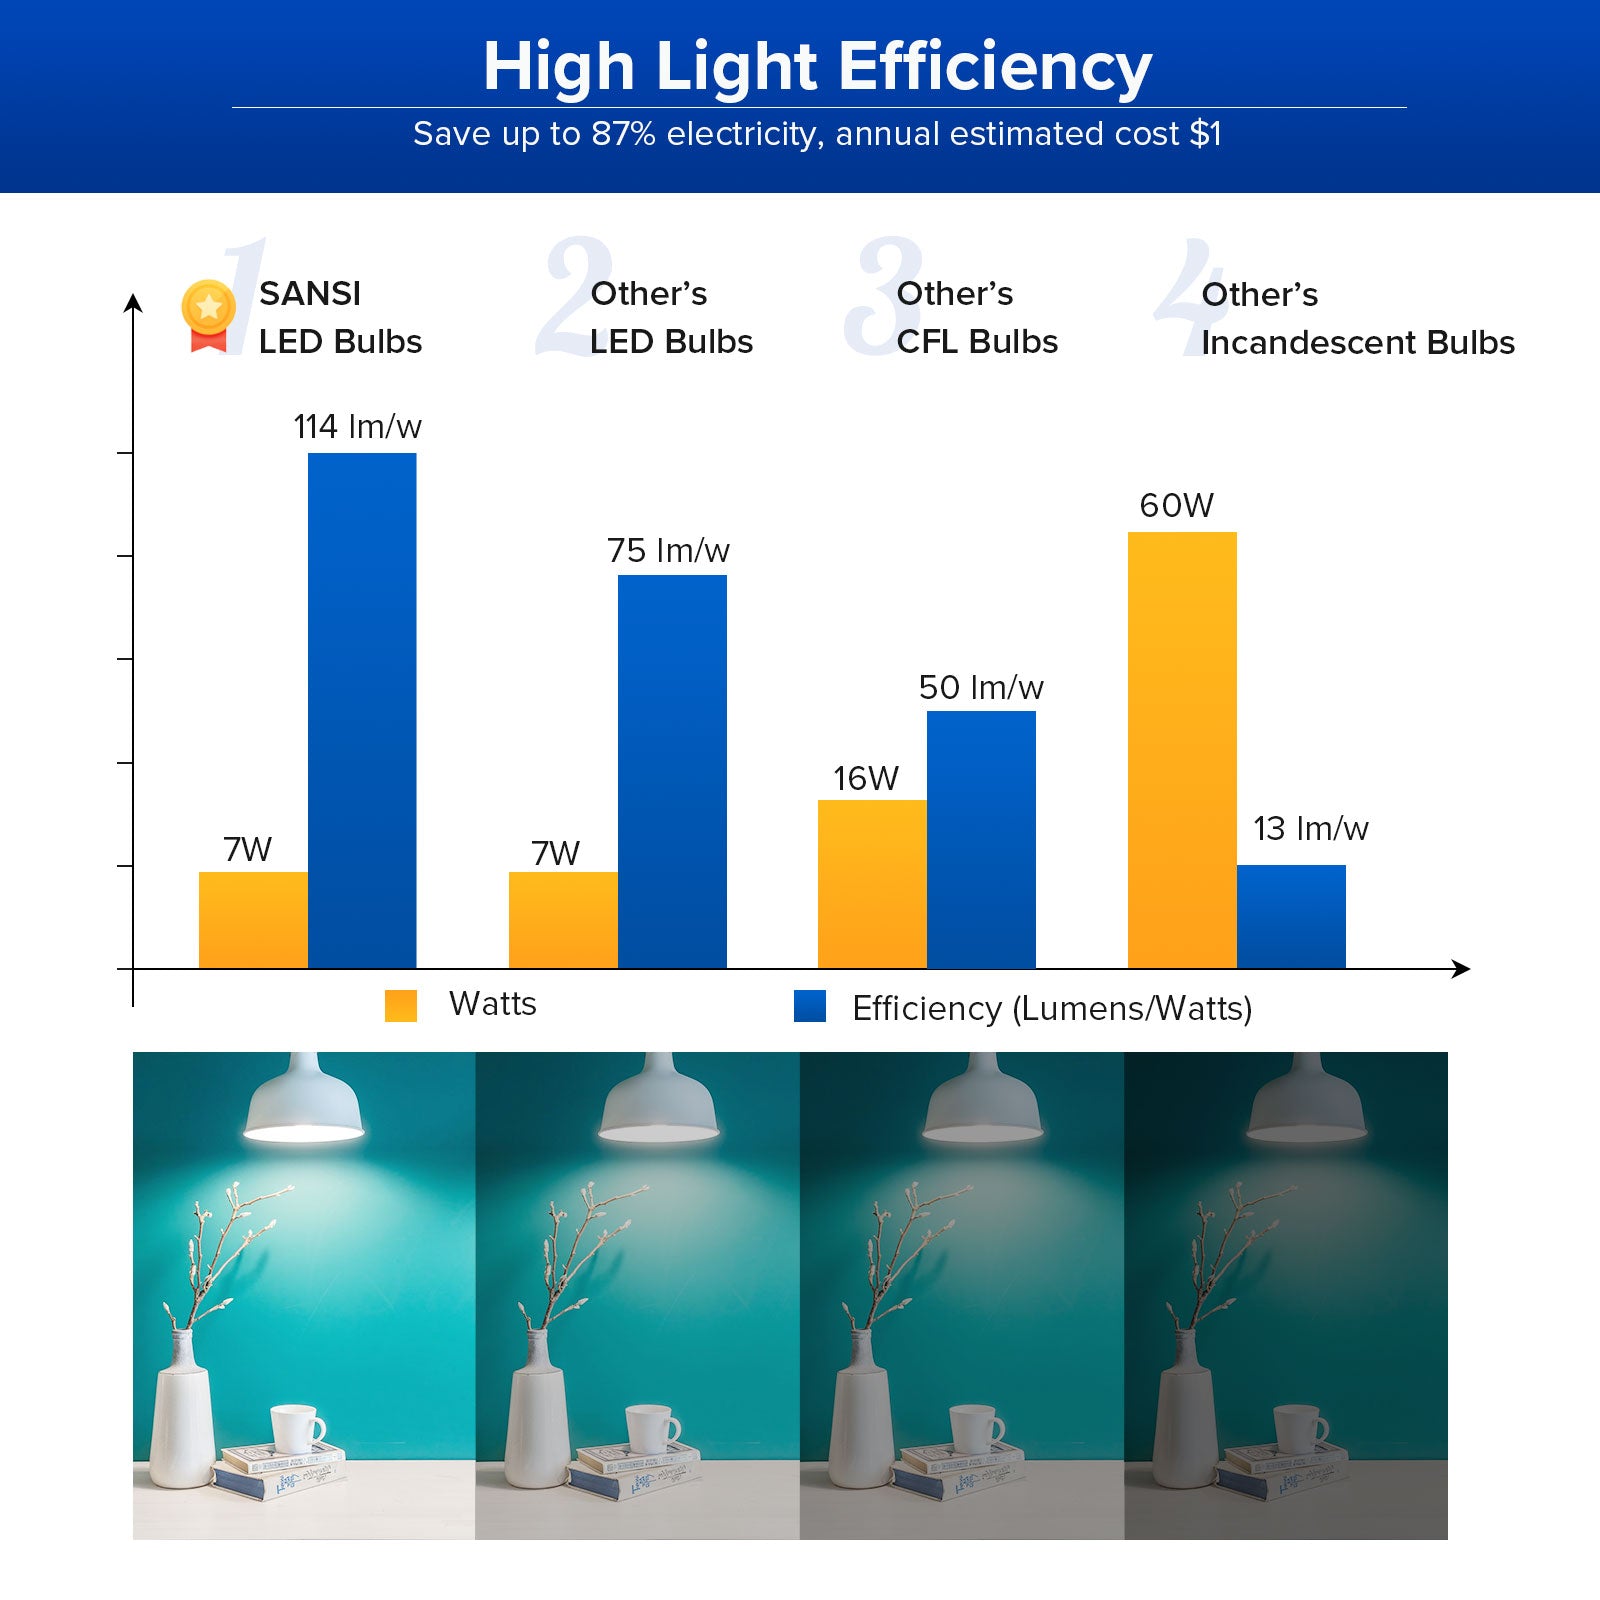 A11 7W LED Light Bulb has high efficiency, save up to 87% electricity, annual estimated cost $1